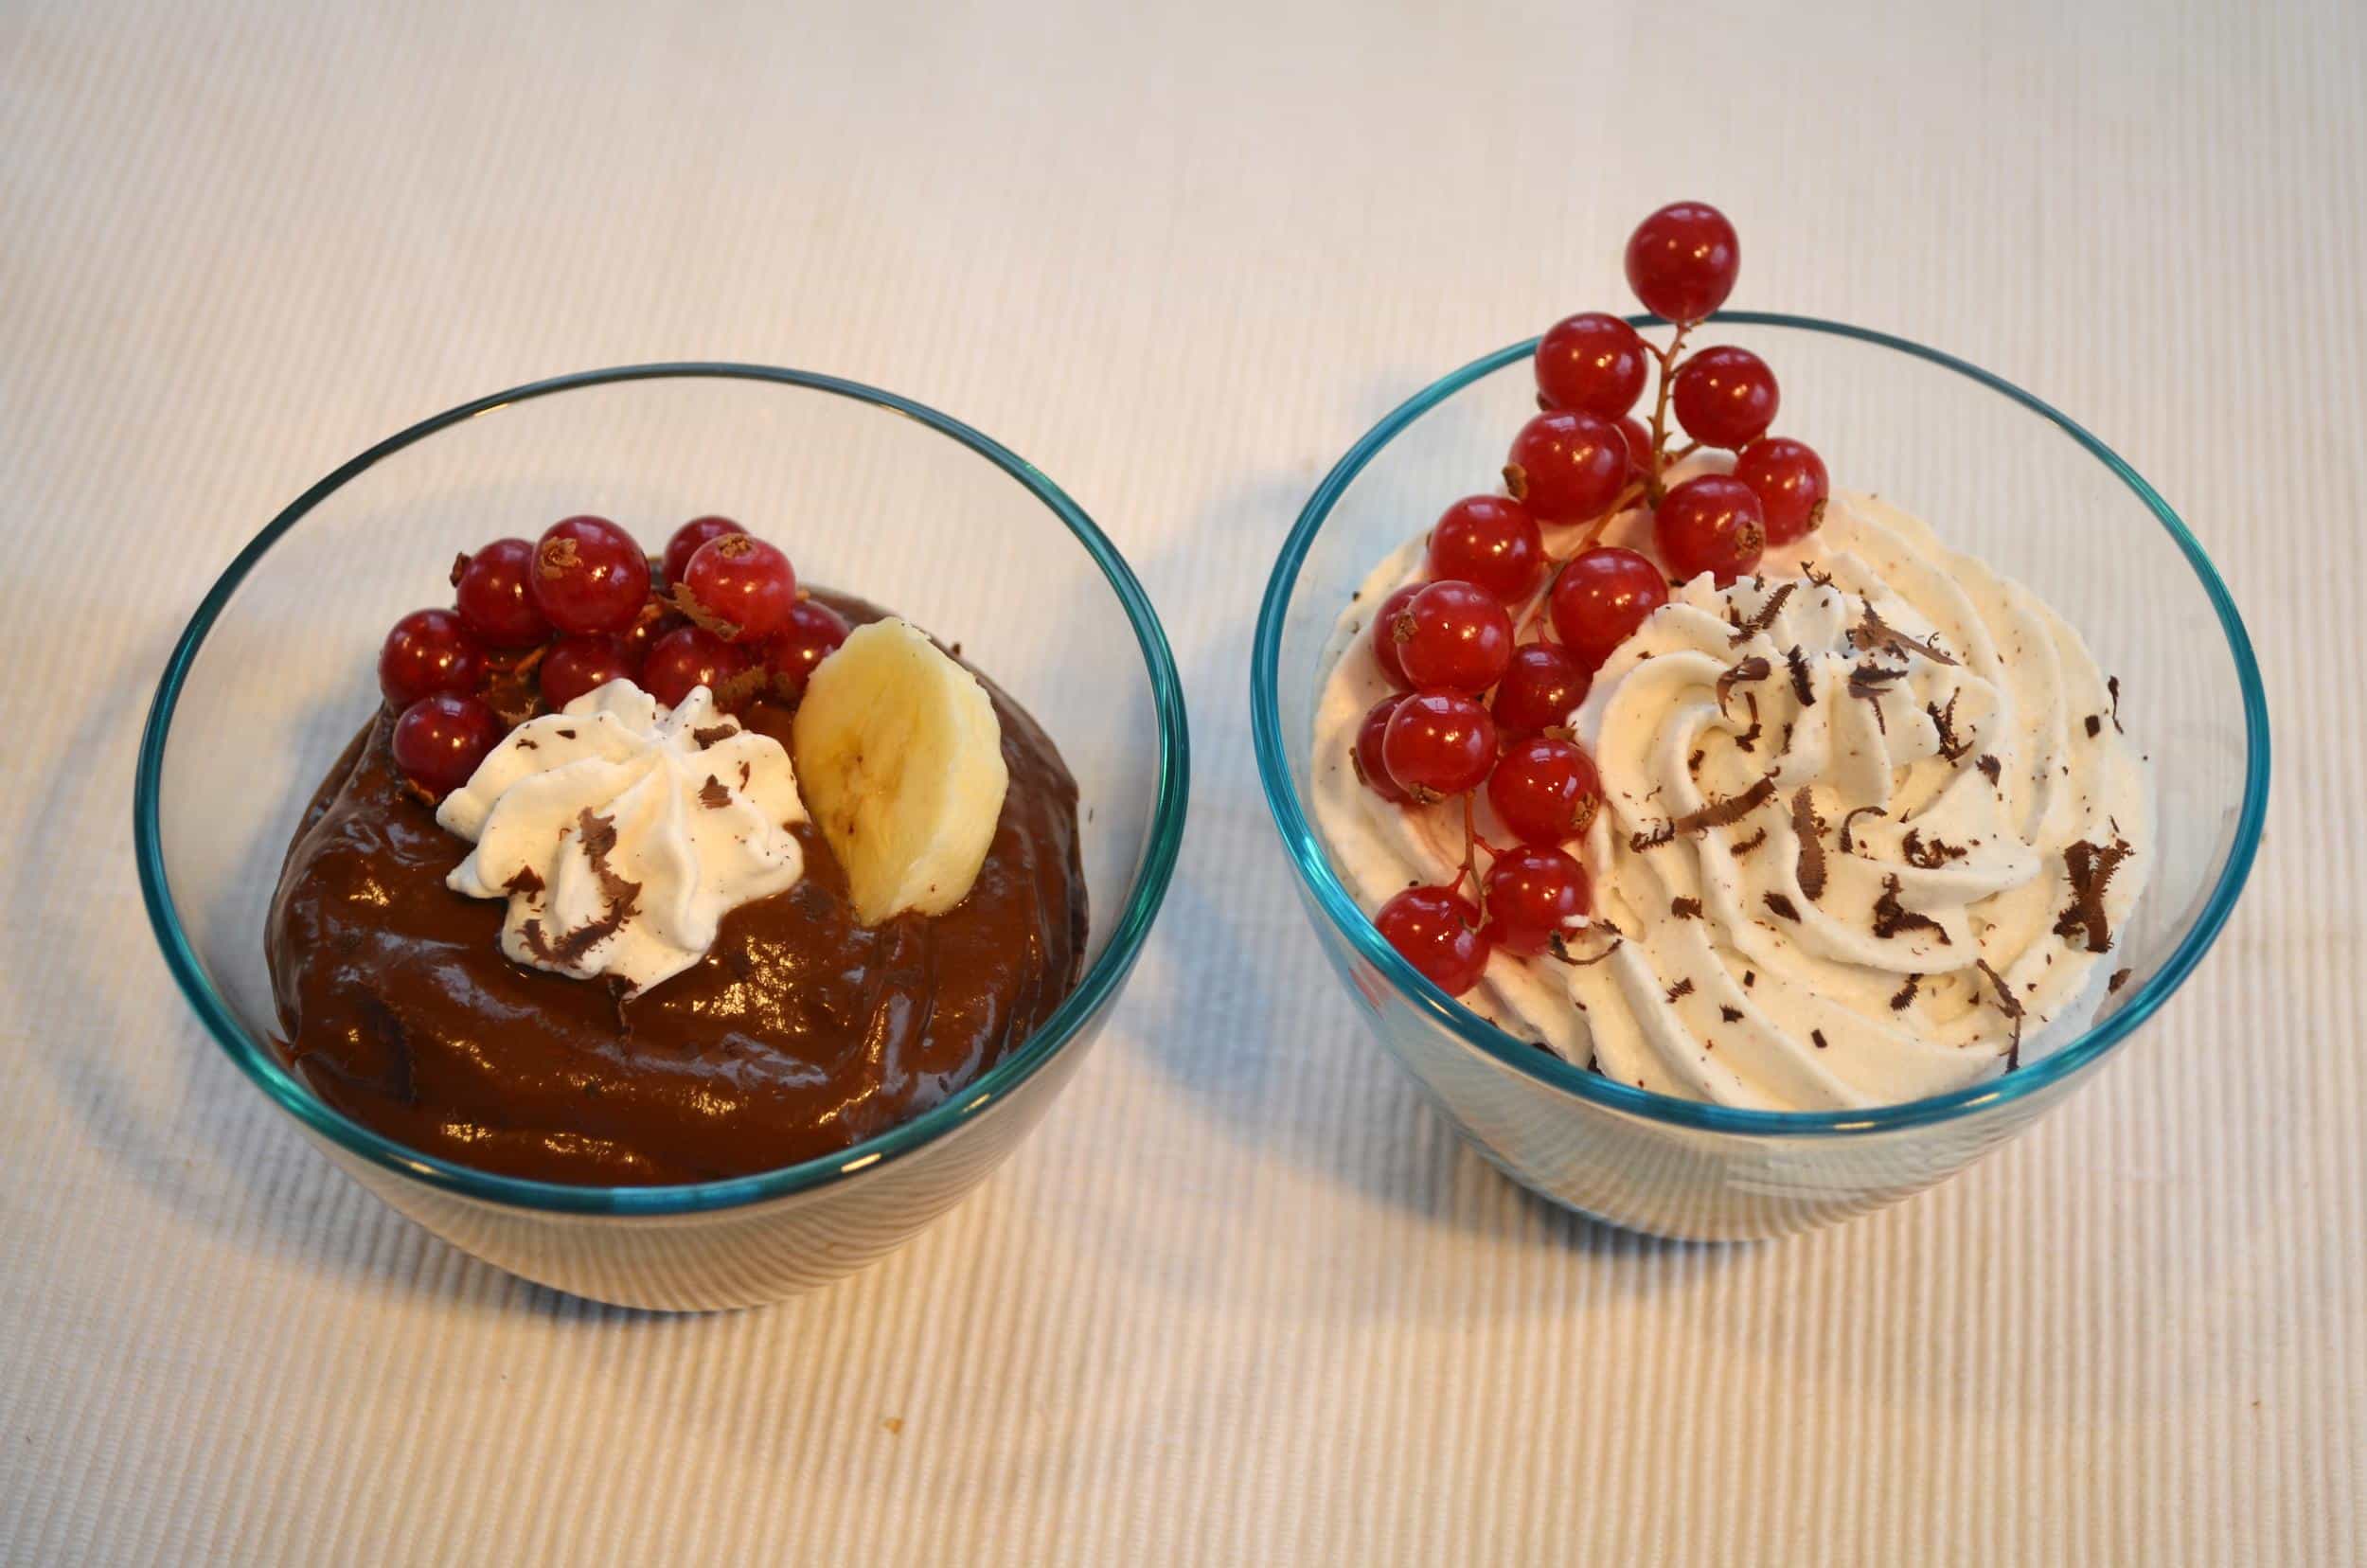 Supersnelle chocolademousse